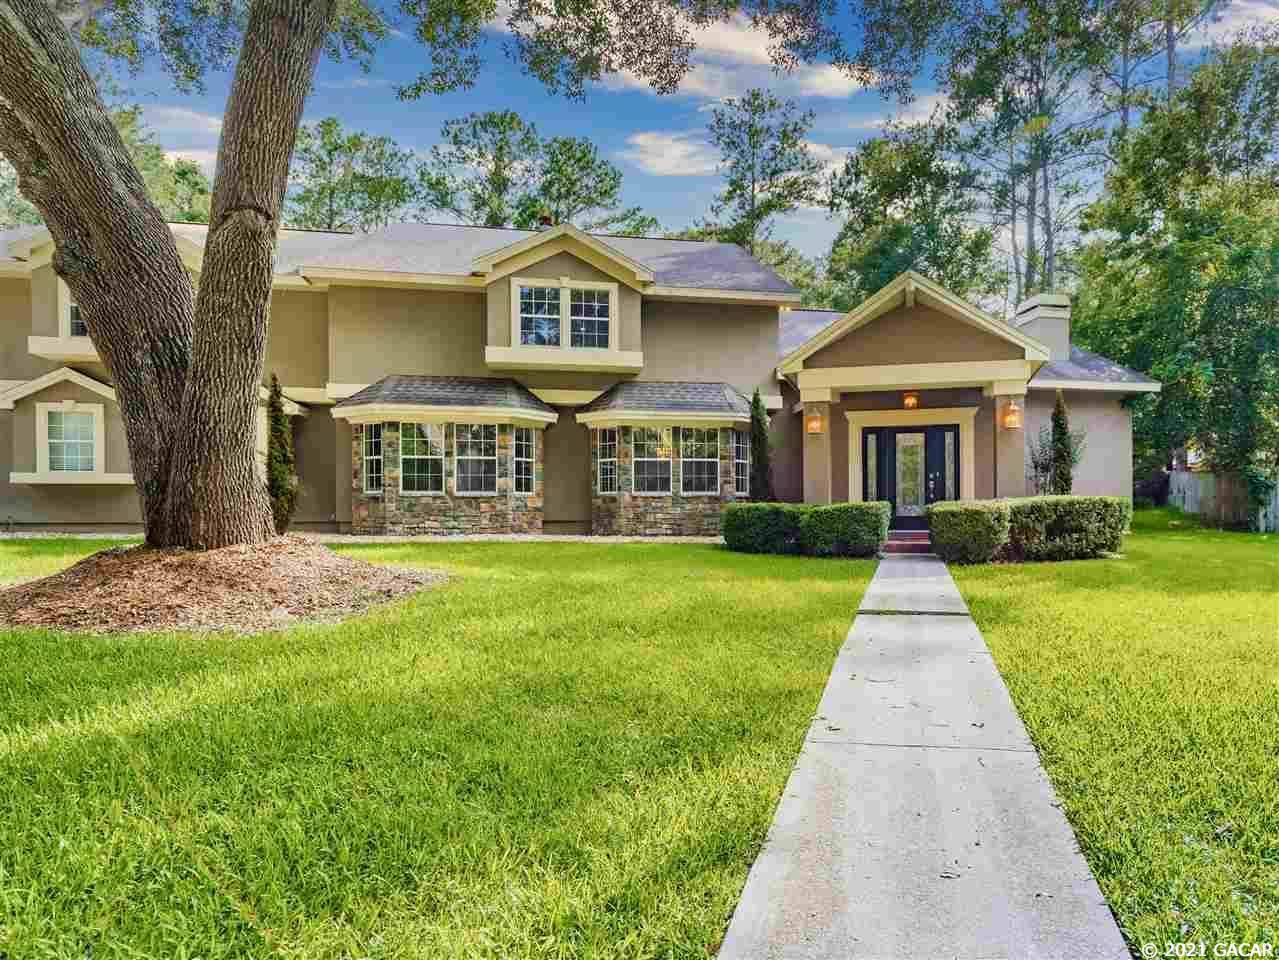 10107 NW 24TH Place, Gainesville, FL 32606